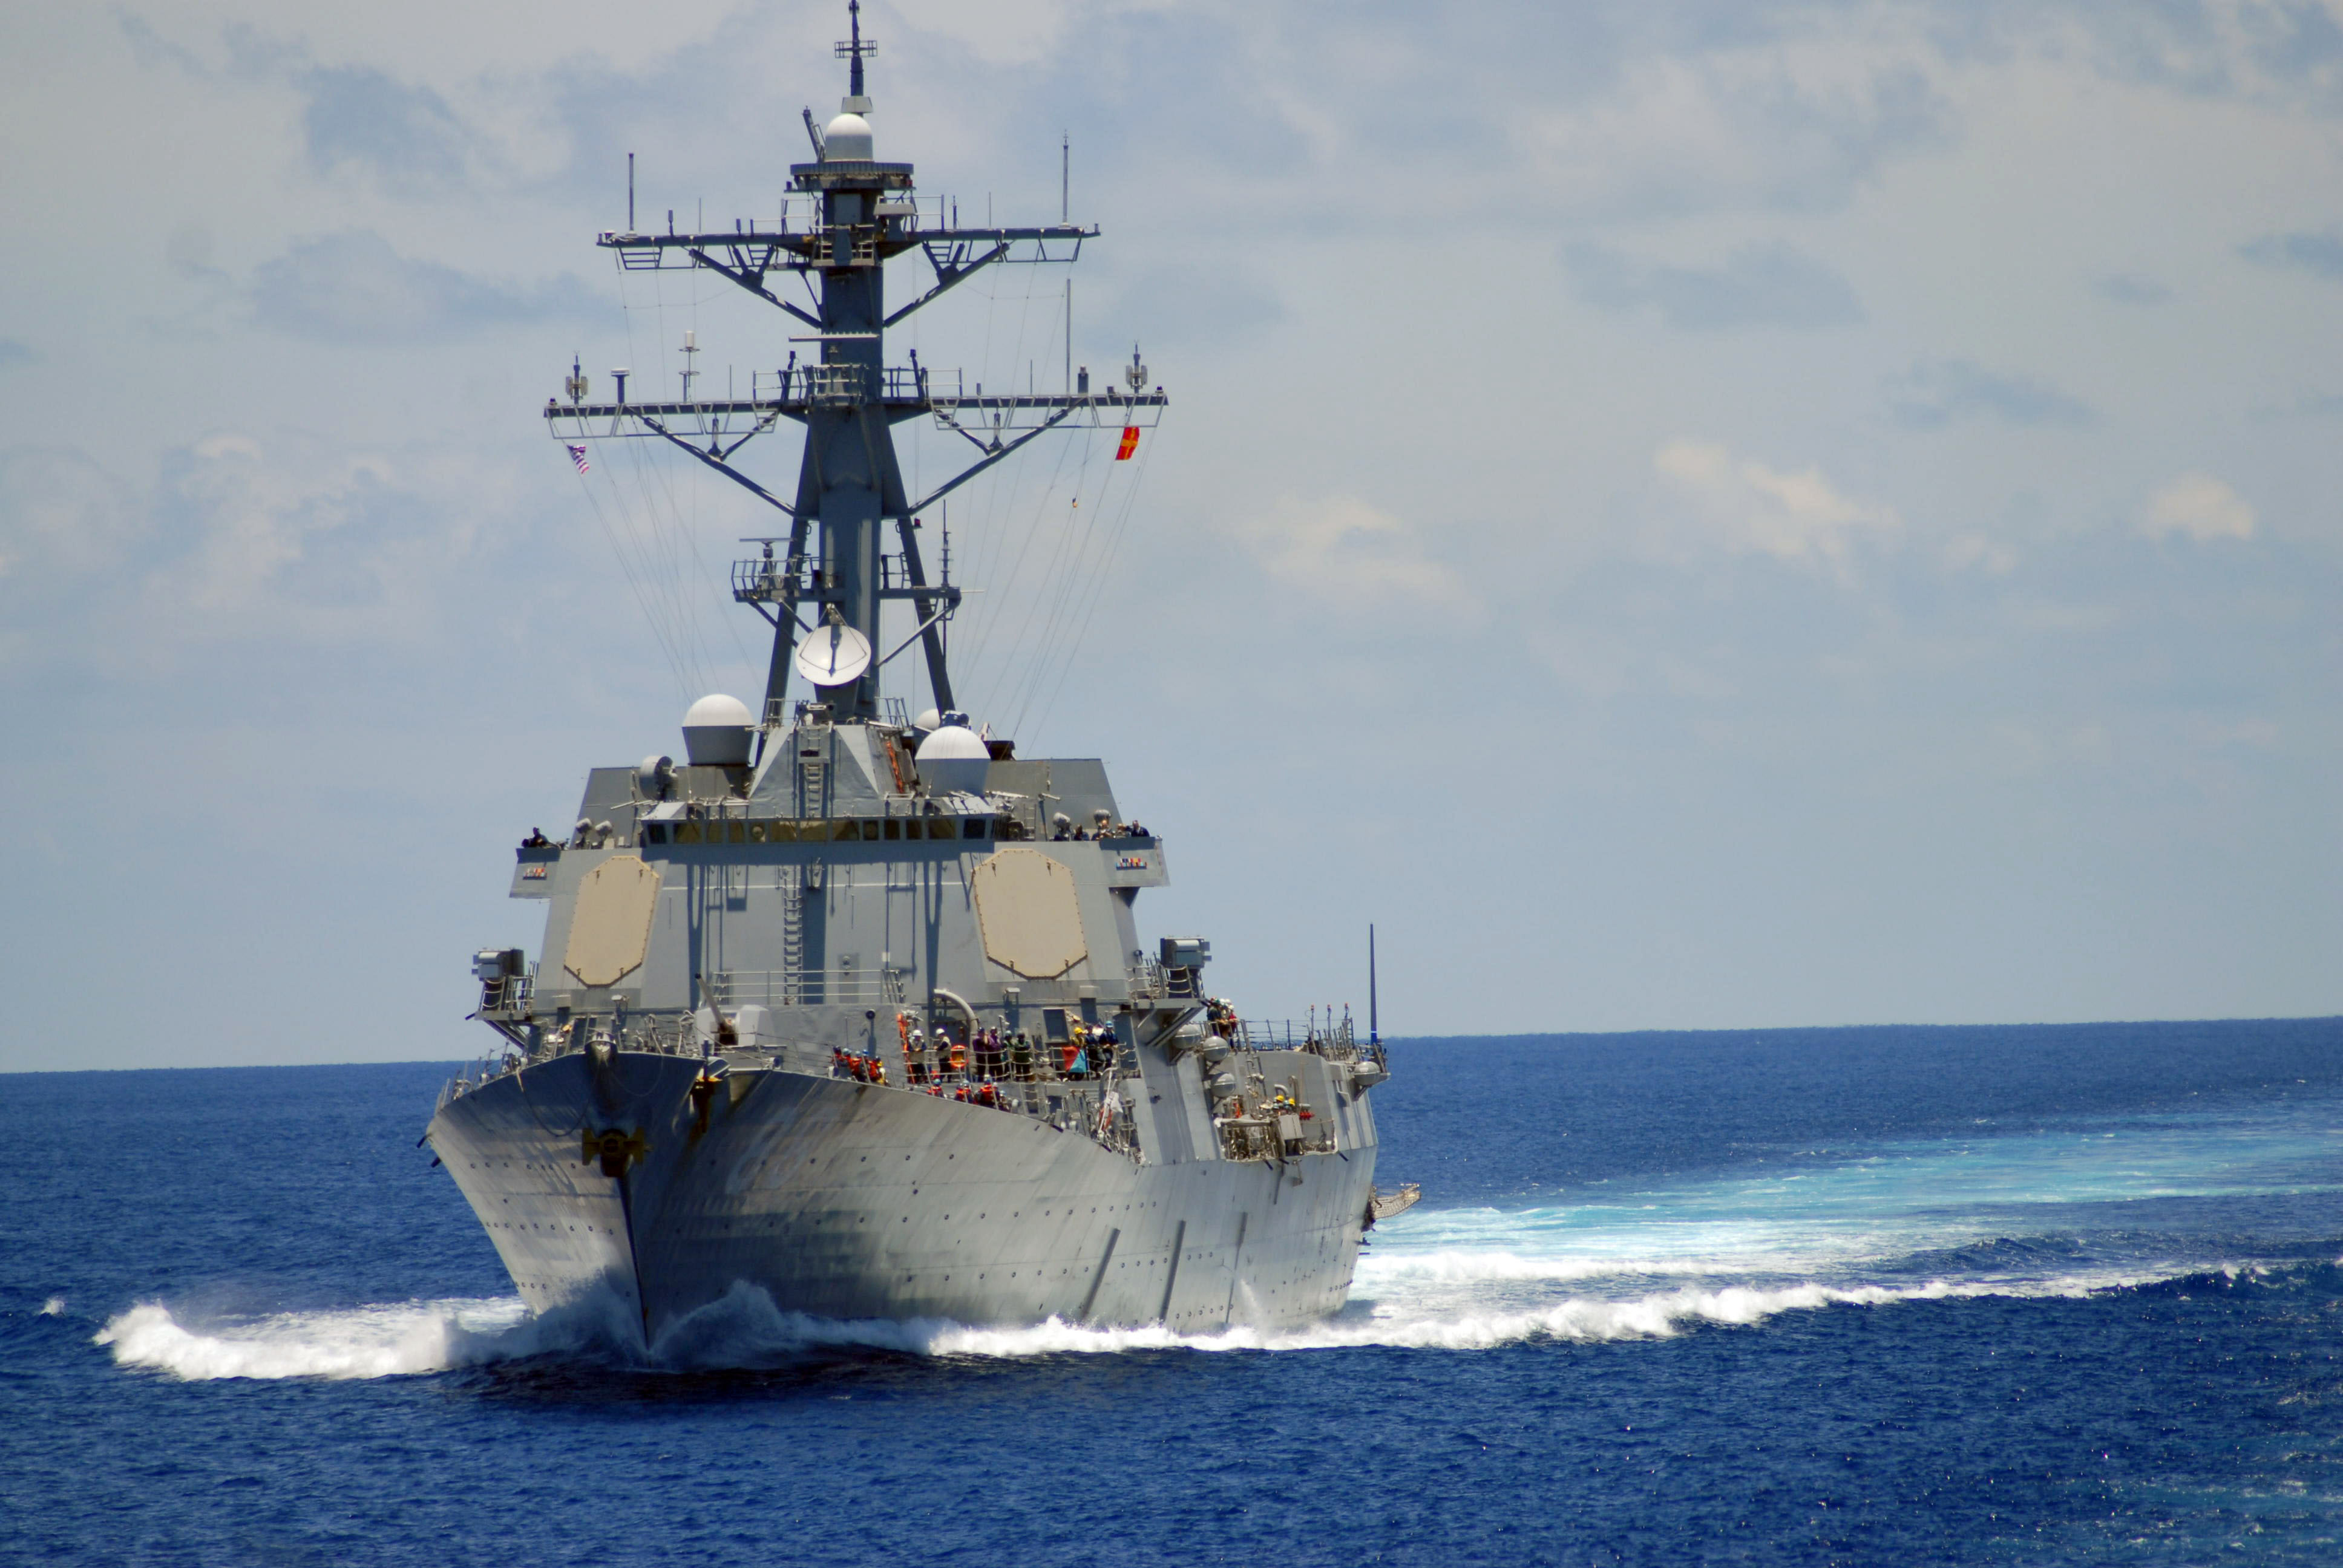 US_Navy_070726-N-7498L-043_The_guided-missile_destroyer_USS_Preble_%28DDG_88%29_commences_its_approach_along_side_Military_Sealift_Command_fast_combat_support_ship_USNS_Bridge_%28T-AOE_10%29_to_receive_fuel_and_supplies_during_a_replen.jpg